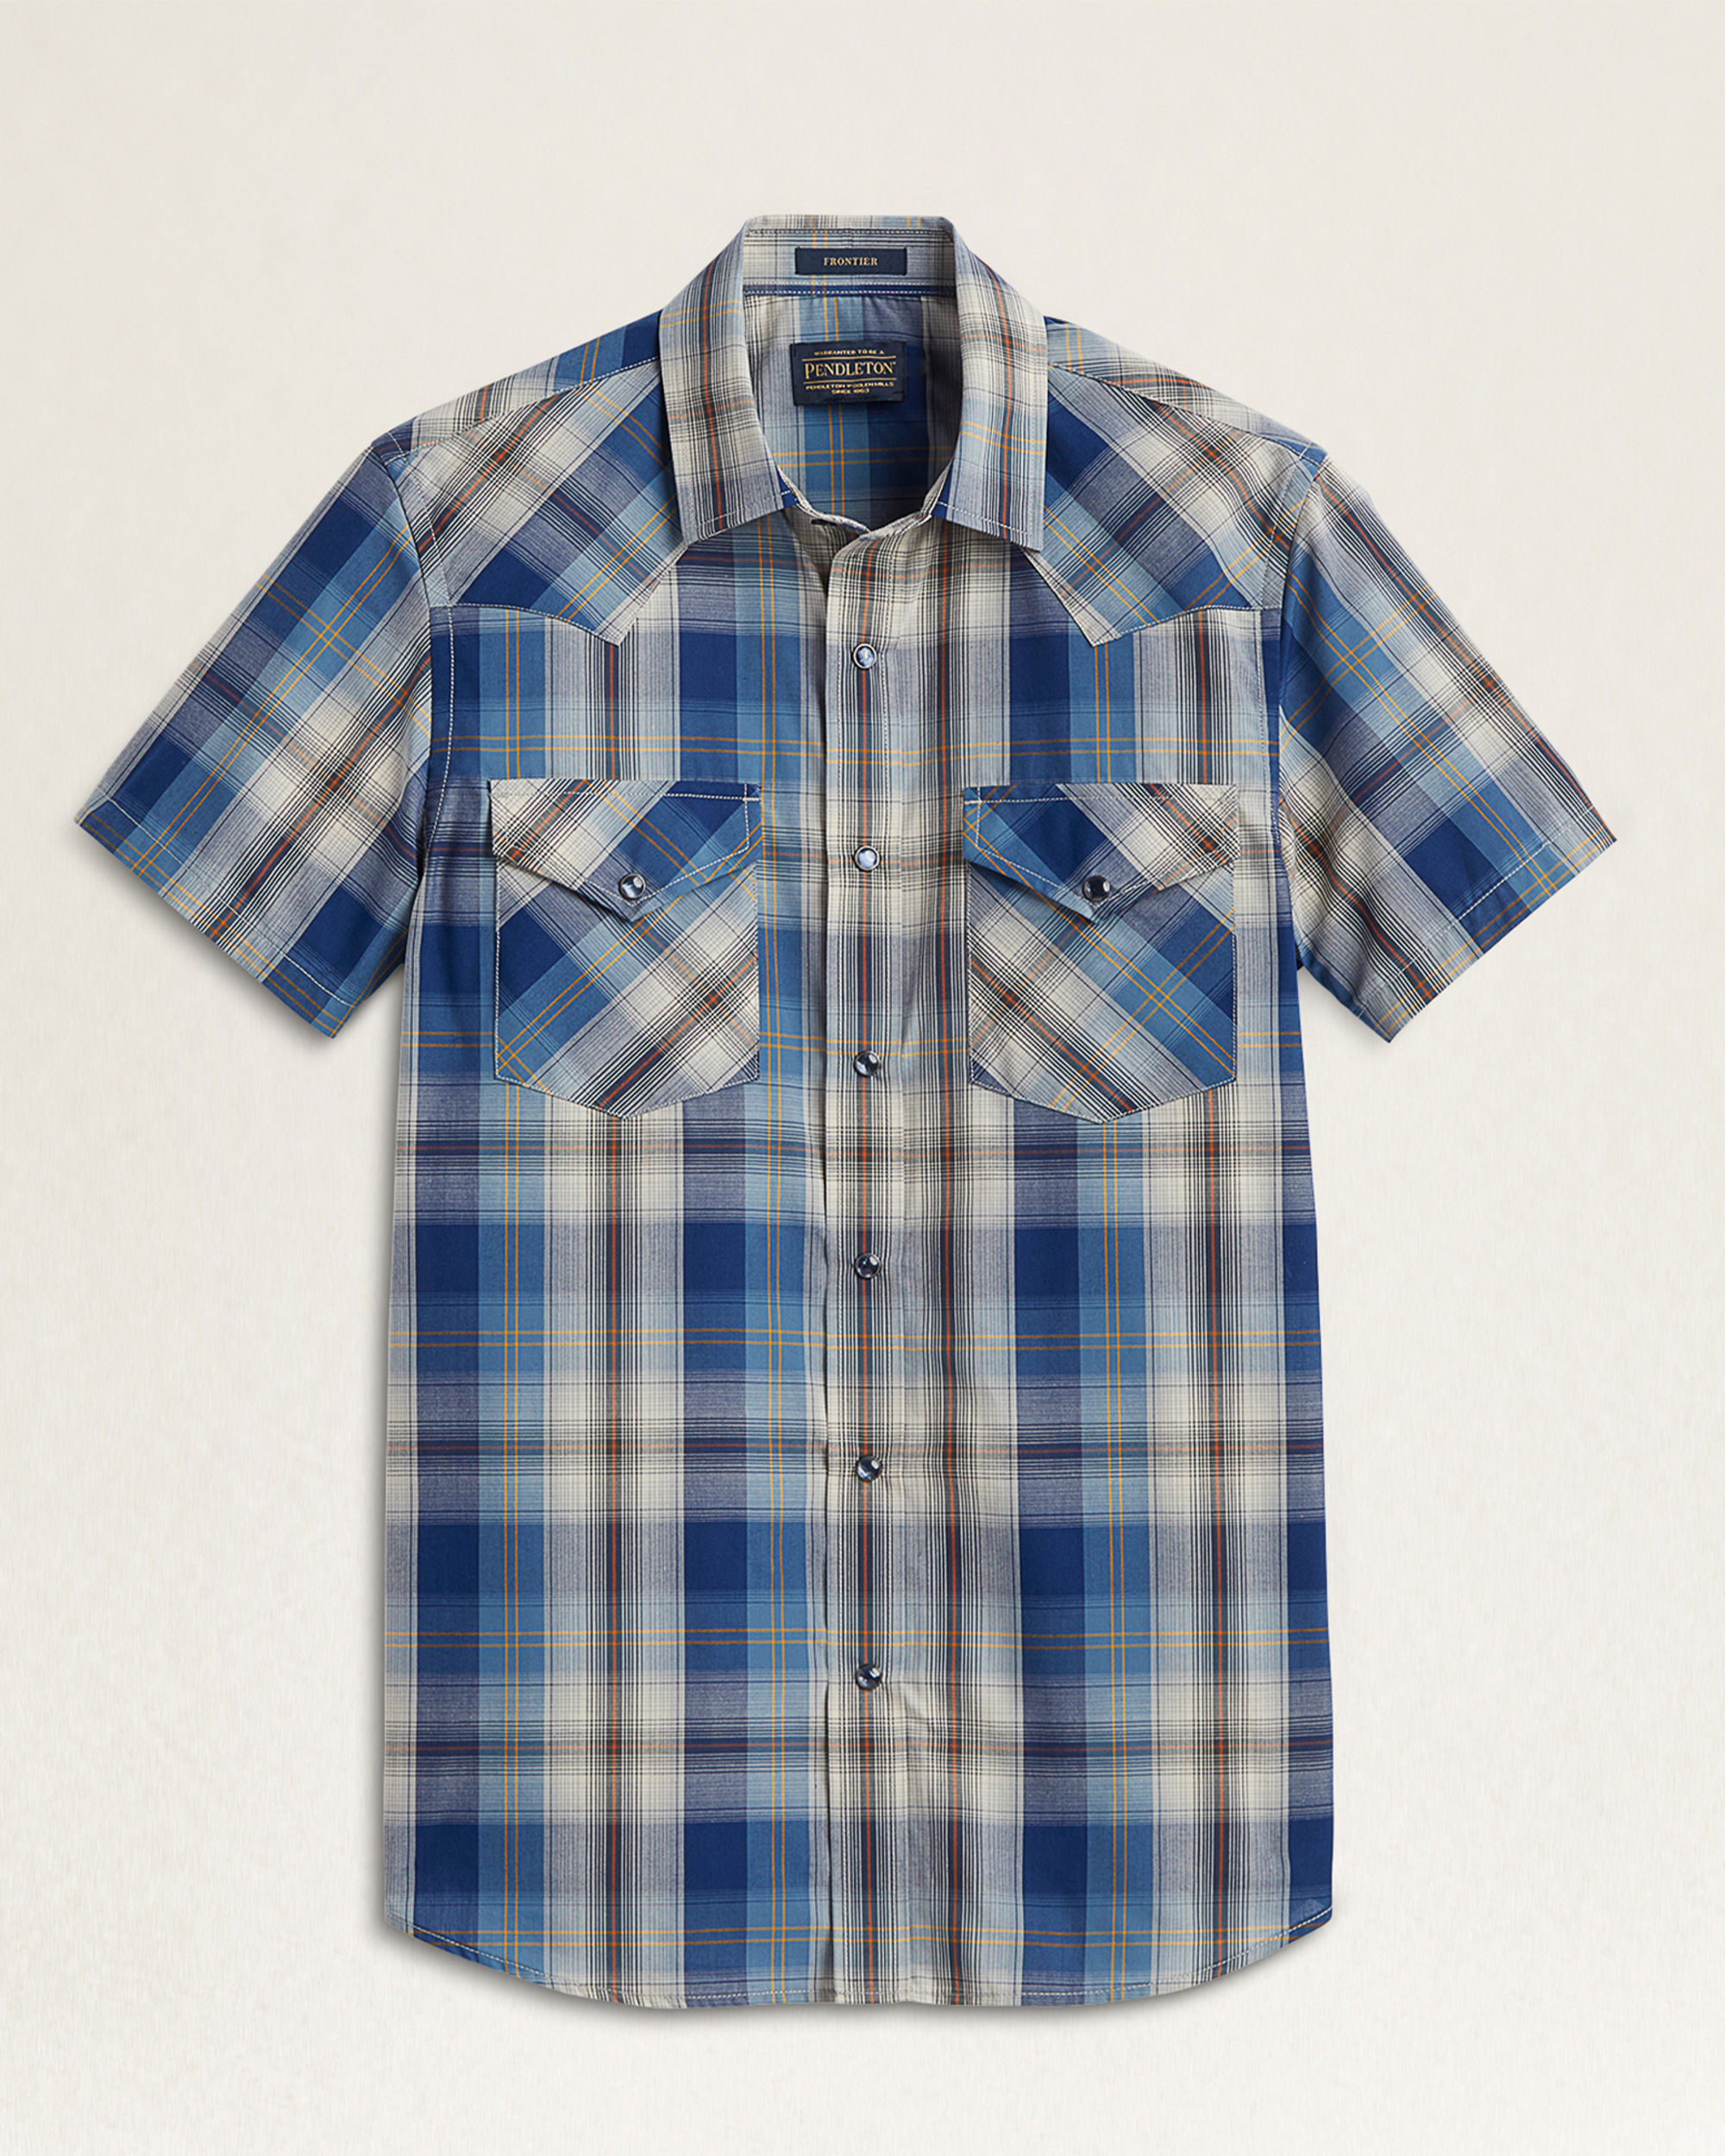 Classic Western Style Shirt for Outdoor Adventure | Pendleton